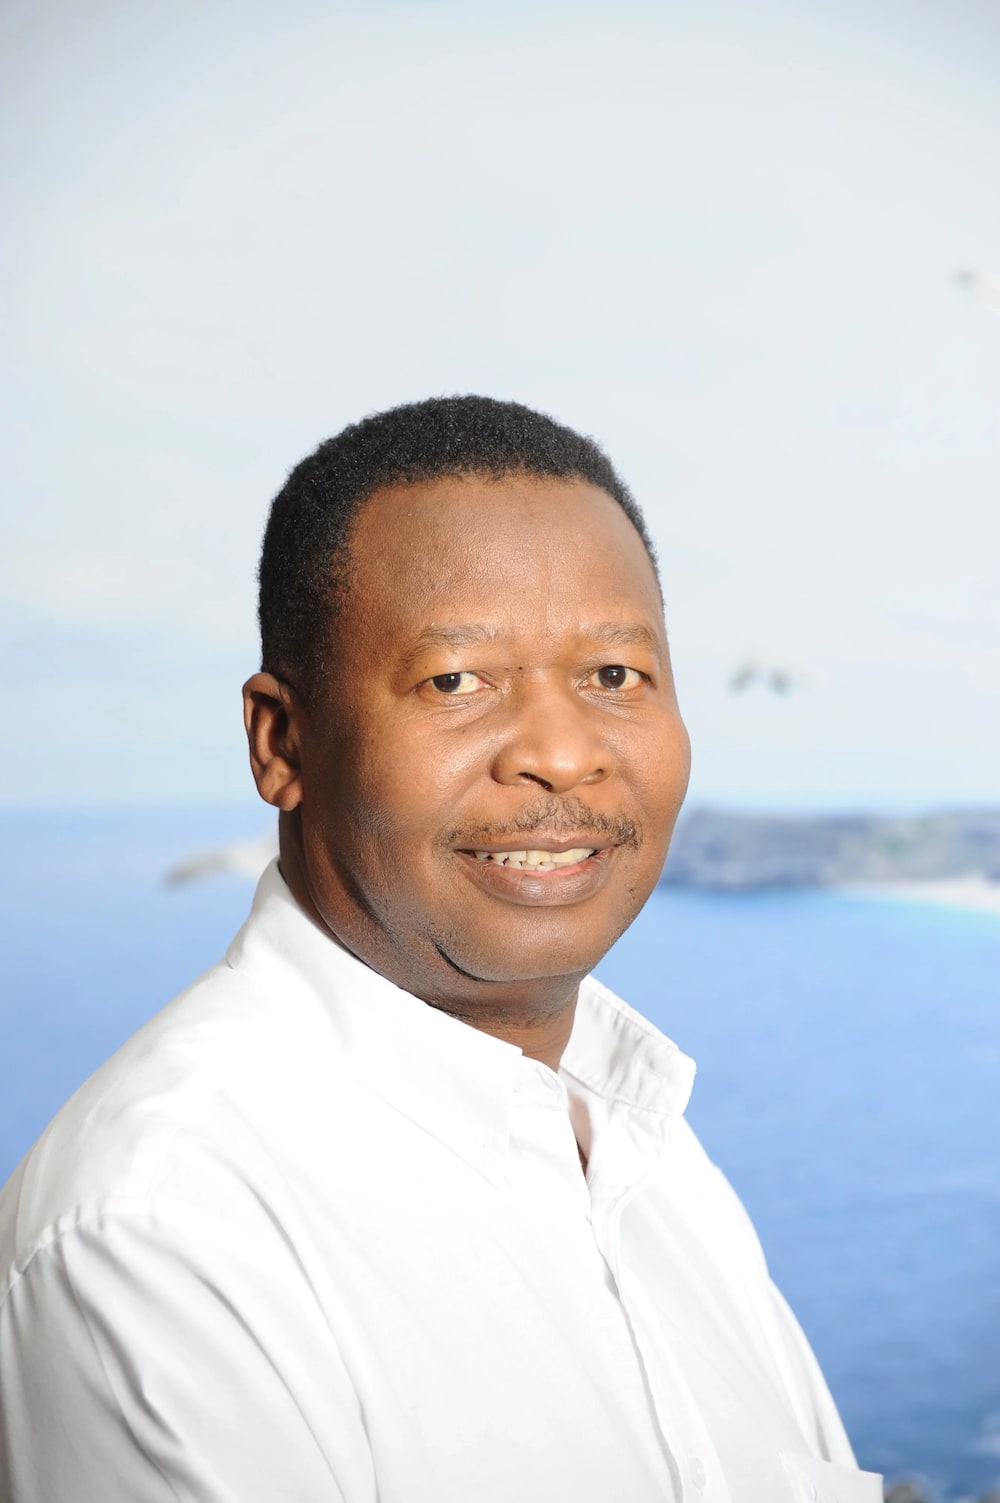 Road to riches: Vincent Mntambo might be South Africa's humblest multi-millionaire